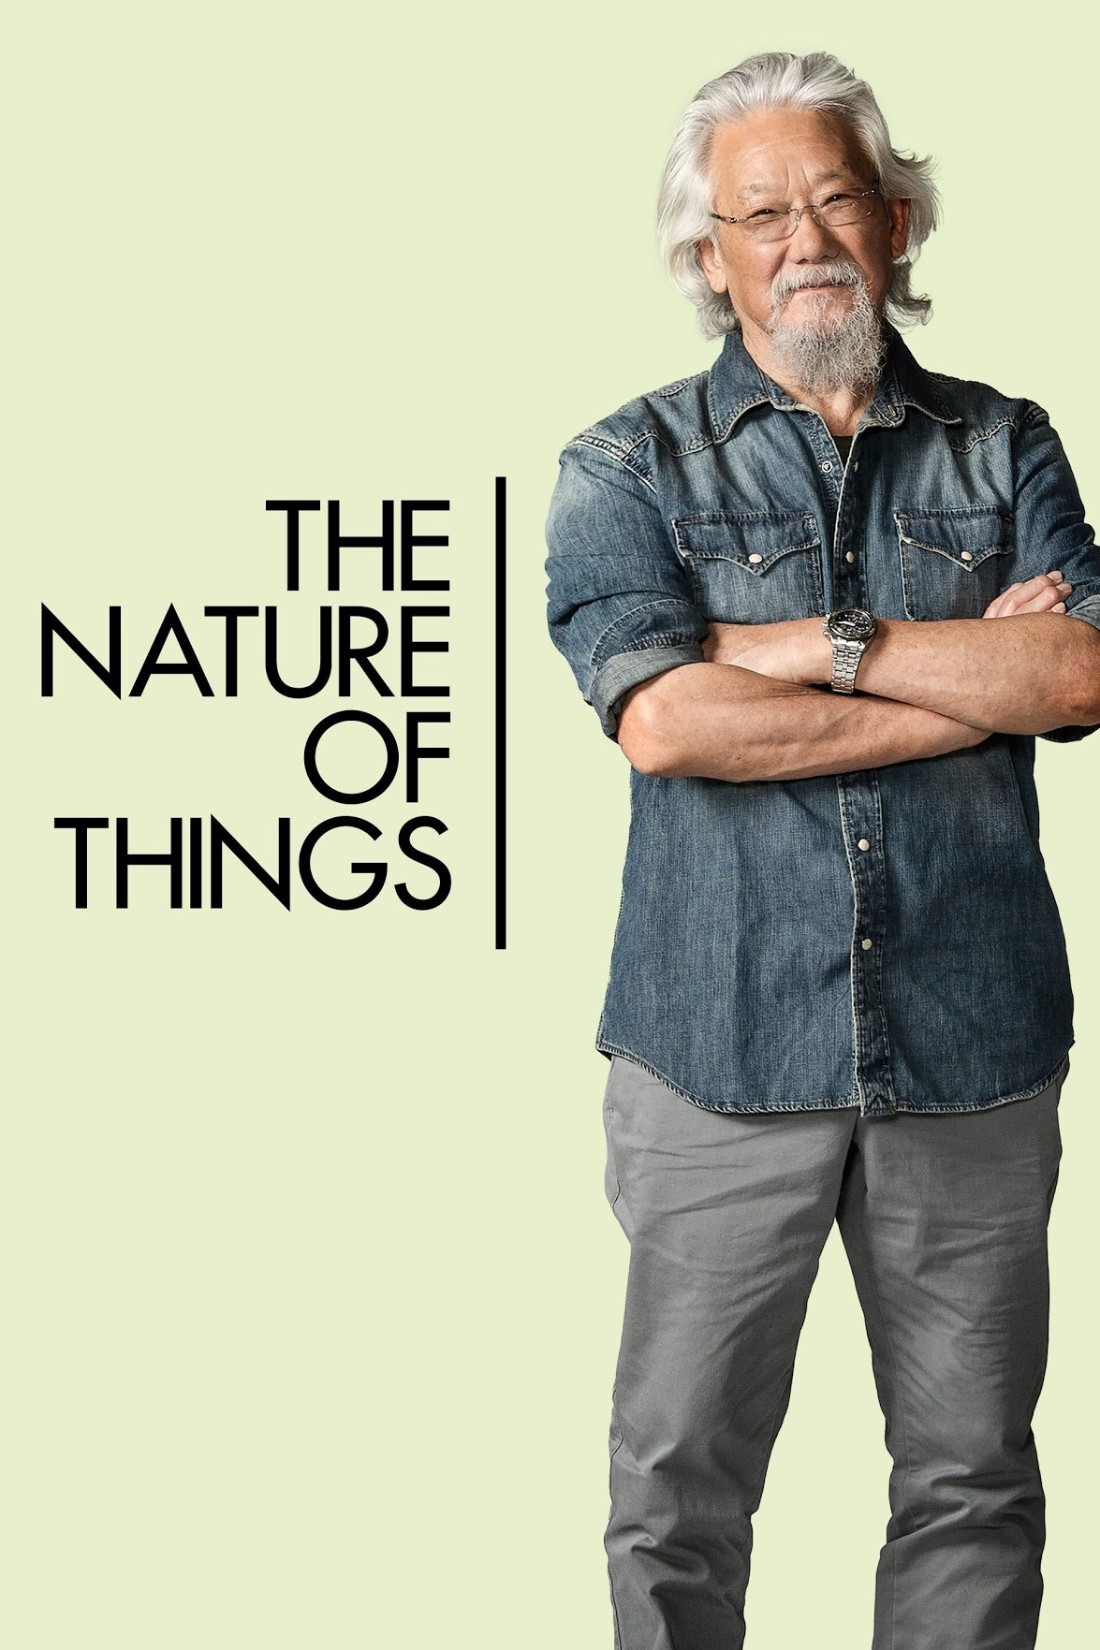 The Nature of Things with David Suzuki S63E01 A Users Guide to the Voice [1080p/720p] (x265) [6 CH] F8f43f6a8114162da77d4f5293aeaef4